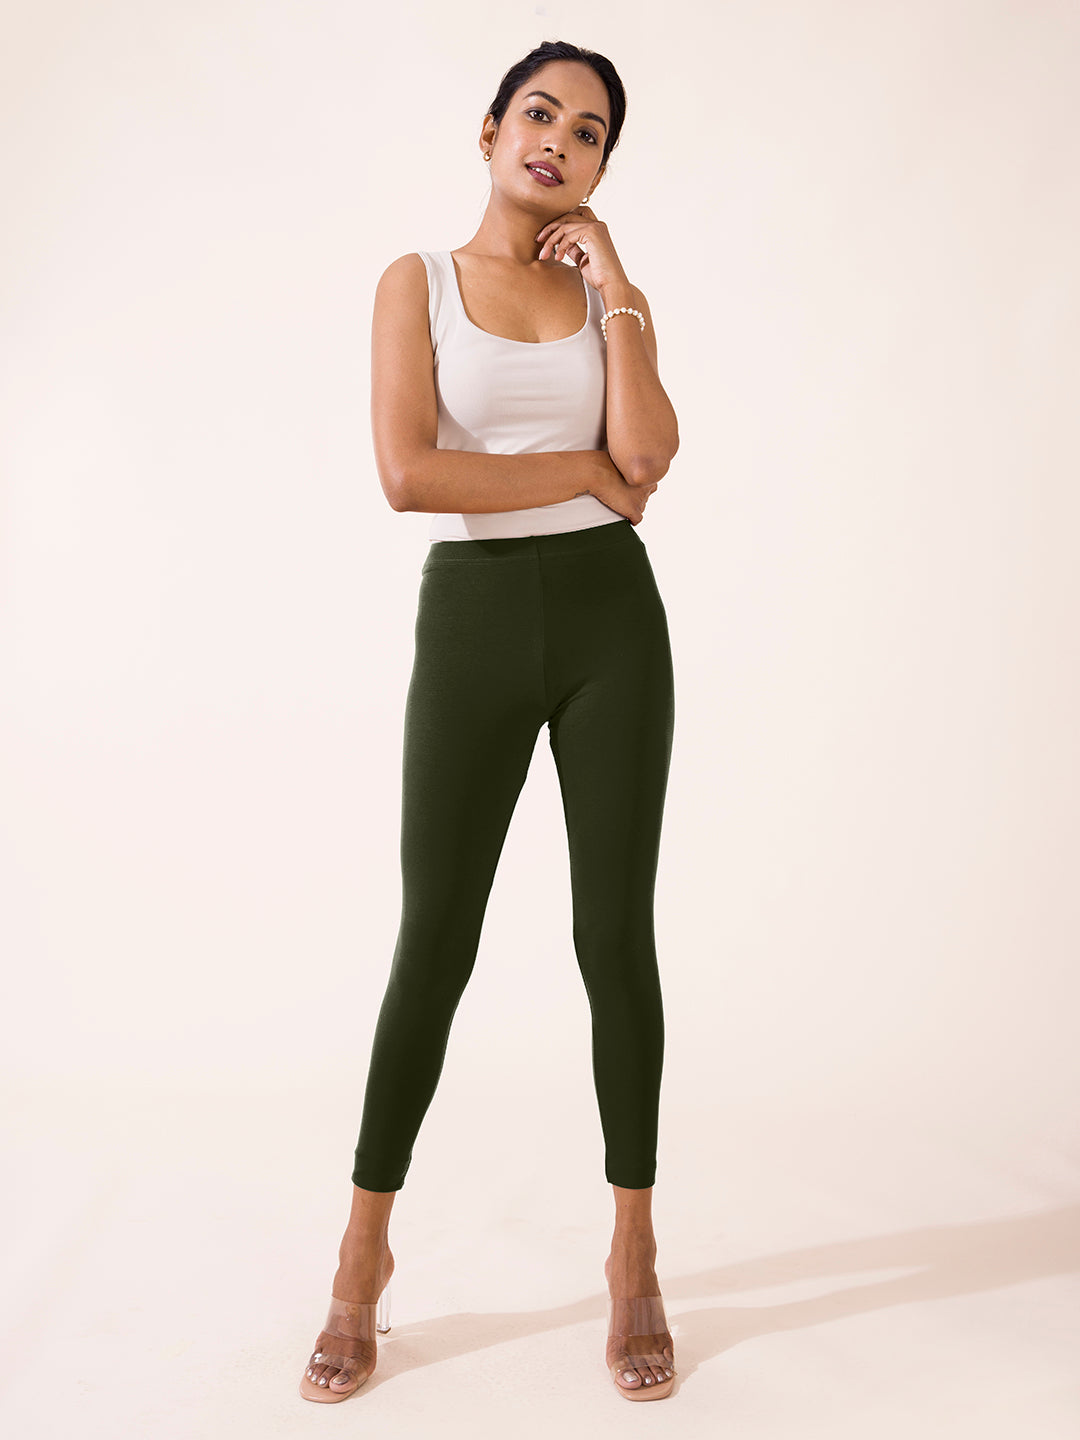 Olive Color Women's Running & Workout Tights - URKNIT